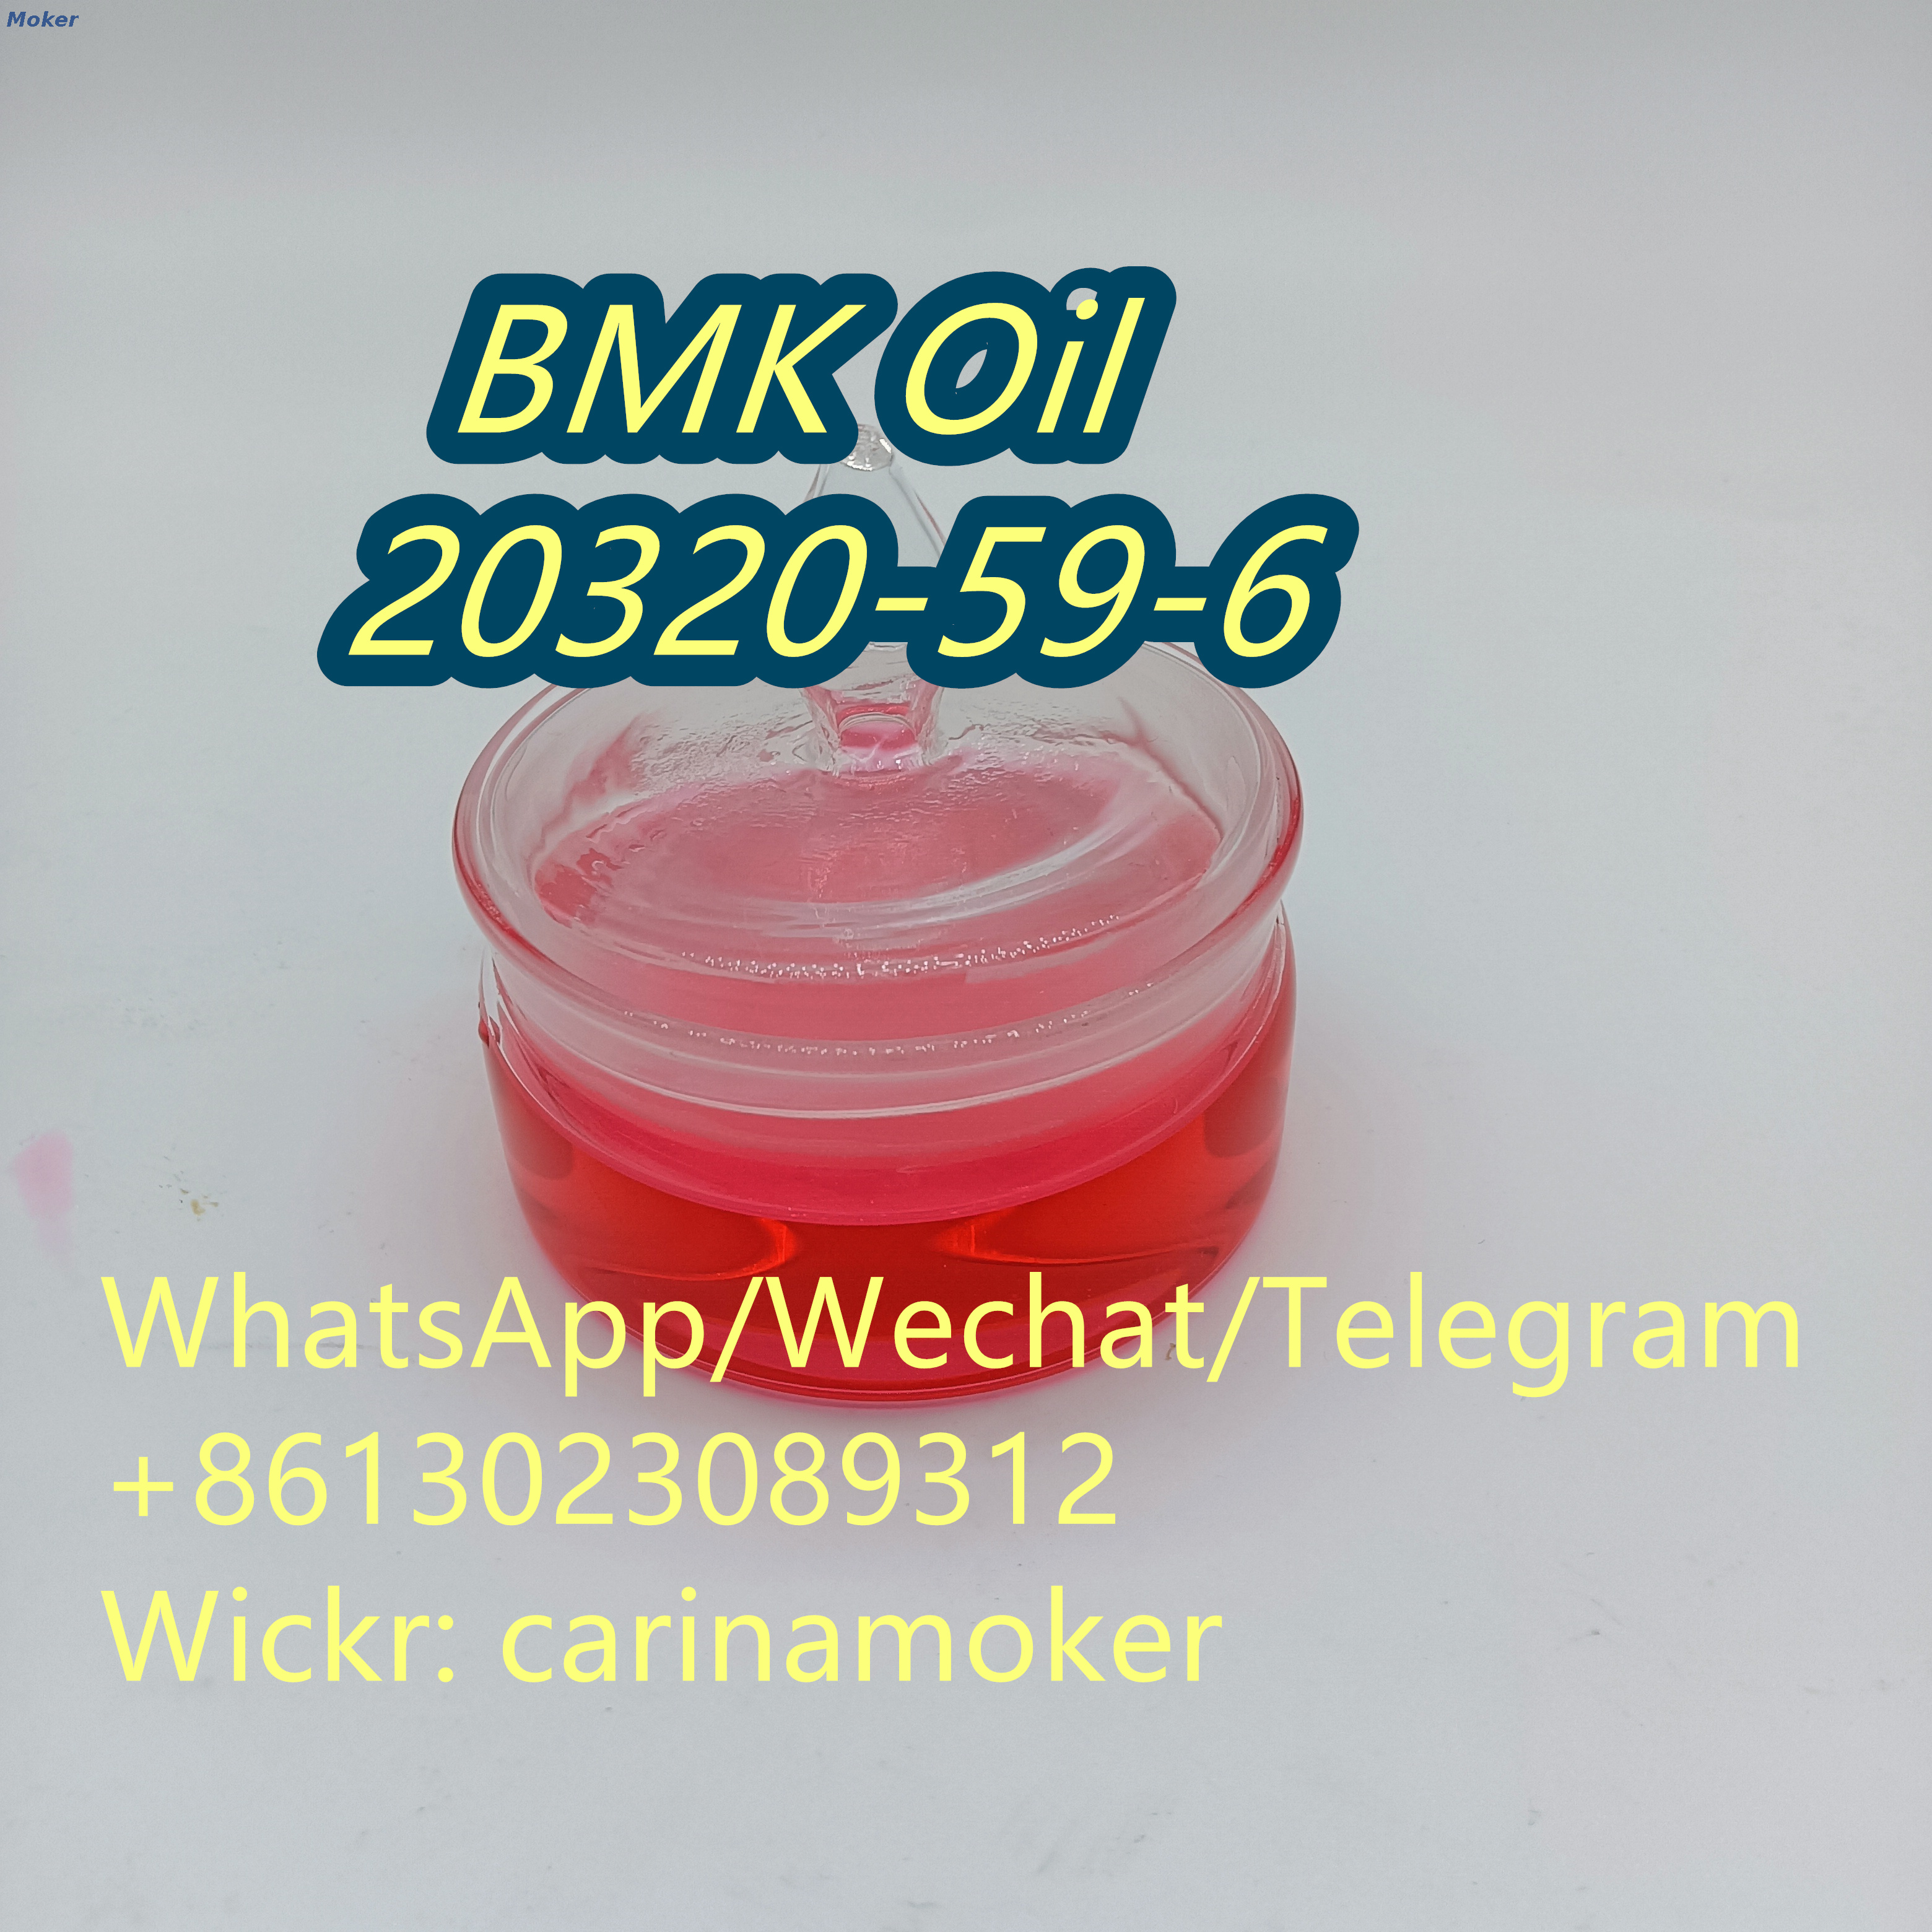 High Purity Product Pharmaceutical Intermediate Bmk Powder CAS 20320-59-6 with Good Price